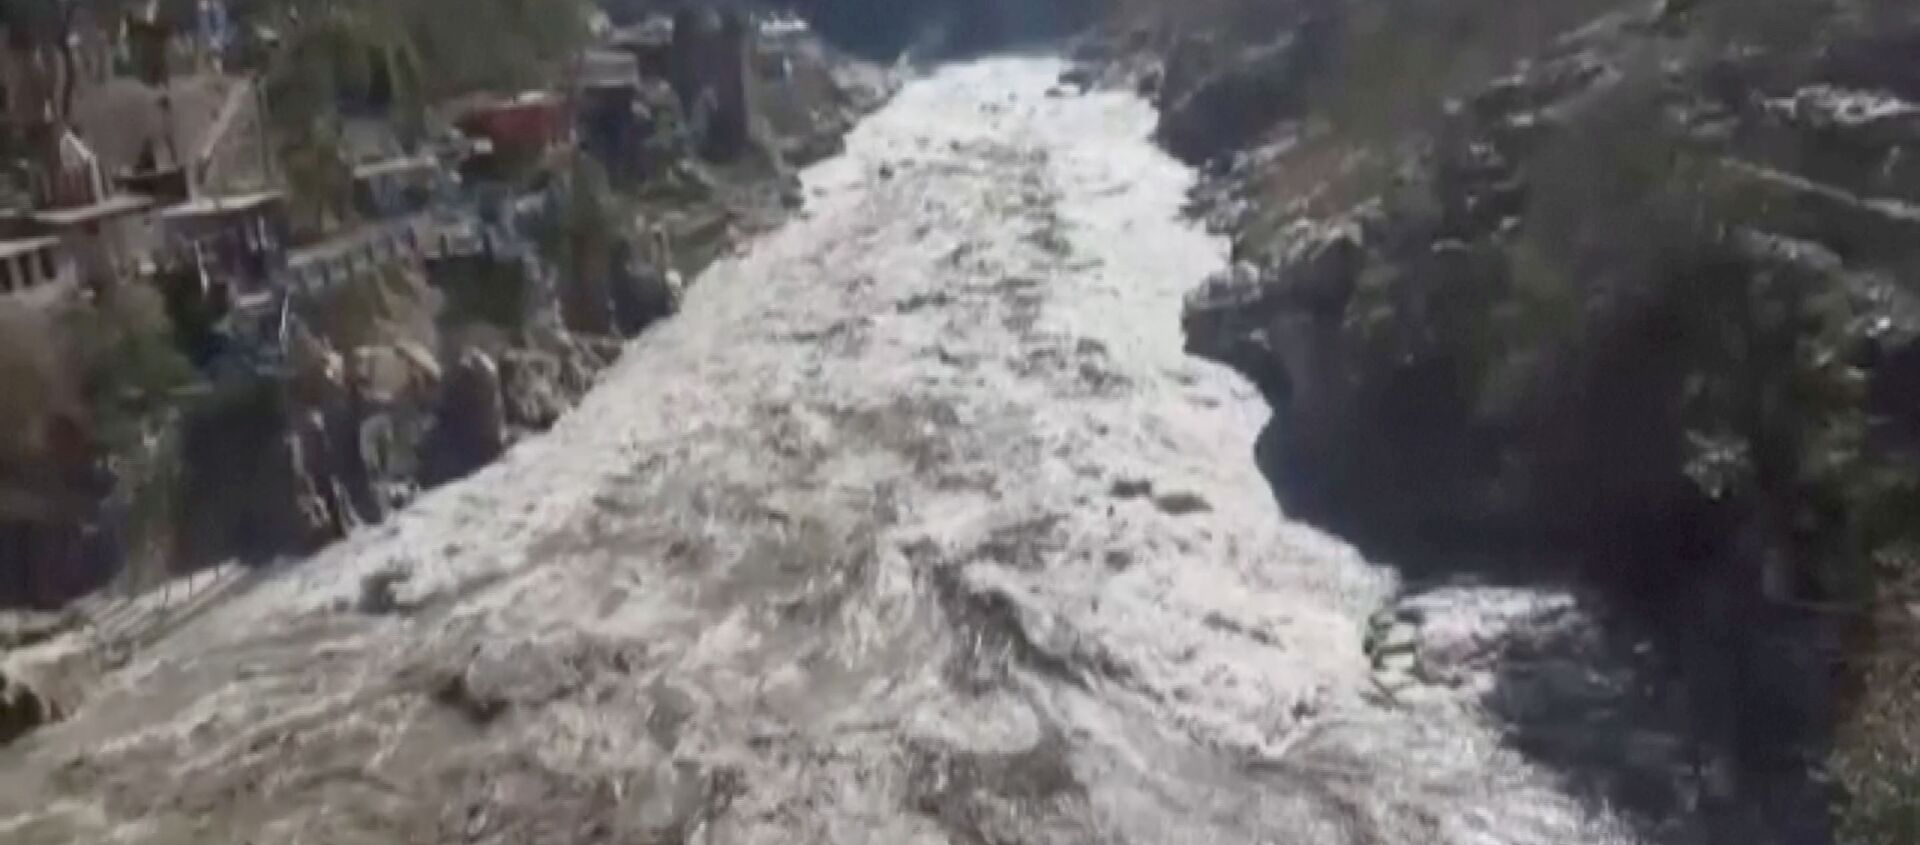 General view during a flood in Chamoli, Uttarakhand, India February 7, 2021 in this still image obtained from a video. - Sputnik International, 1920, 07.02.2021